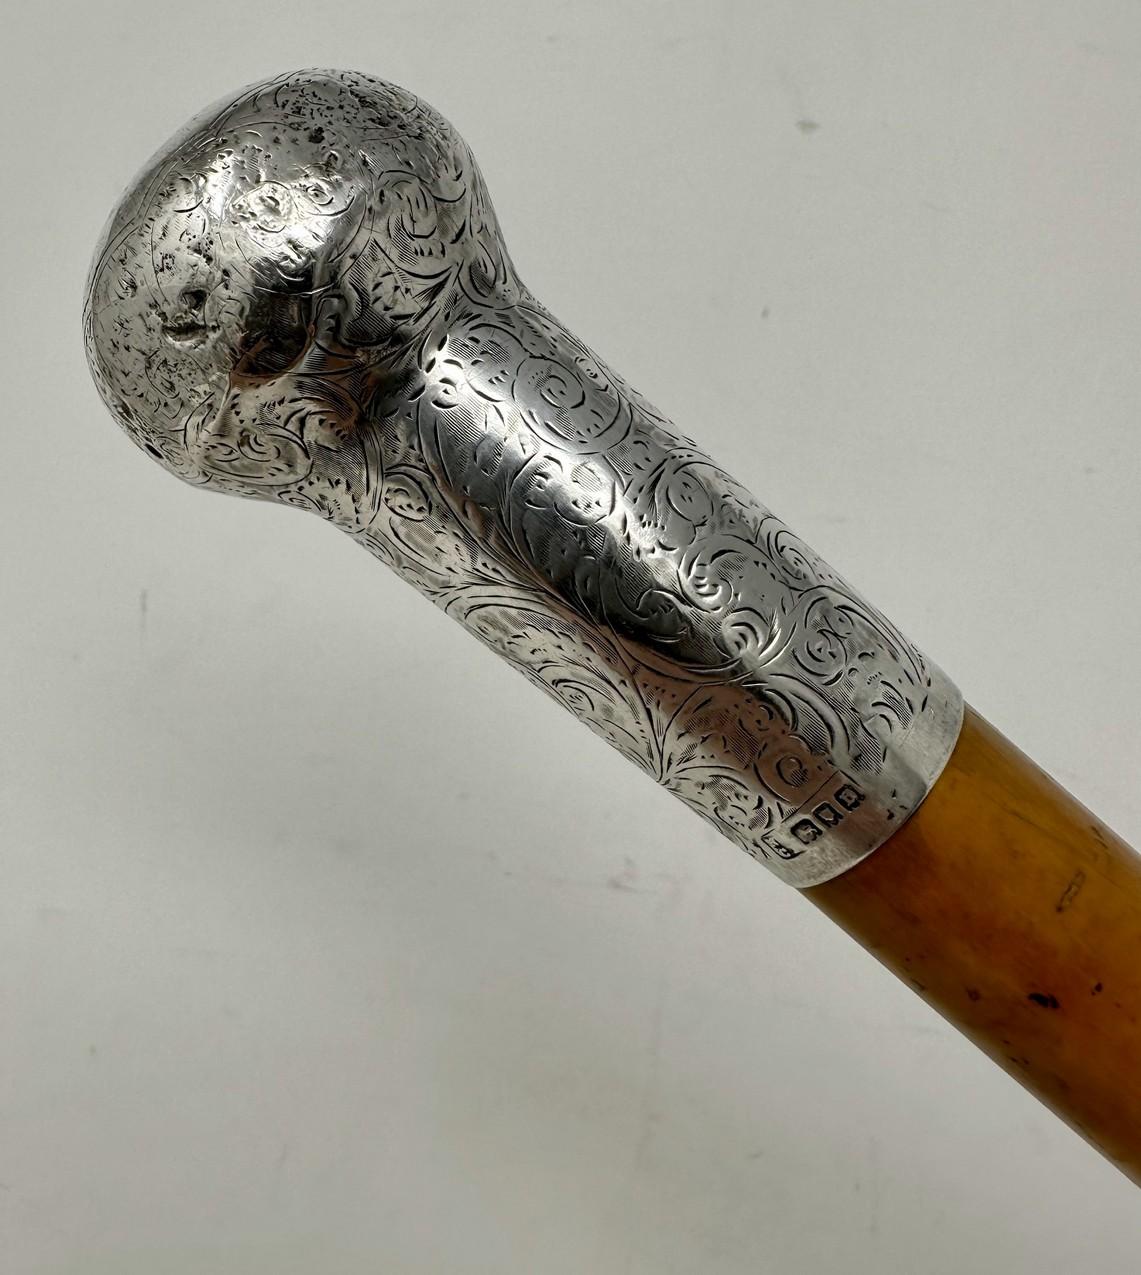 Carved Antique Malacca Wooden English Walking Swagger Stick Cane Sterling Silver London